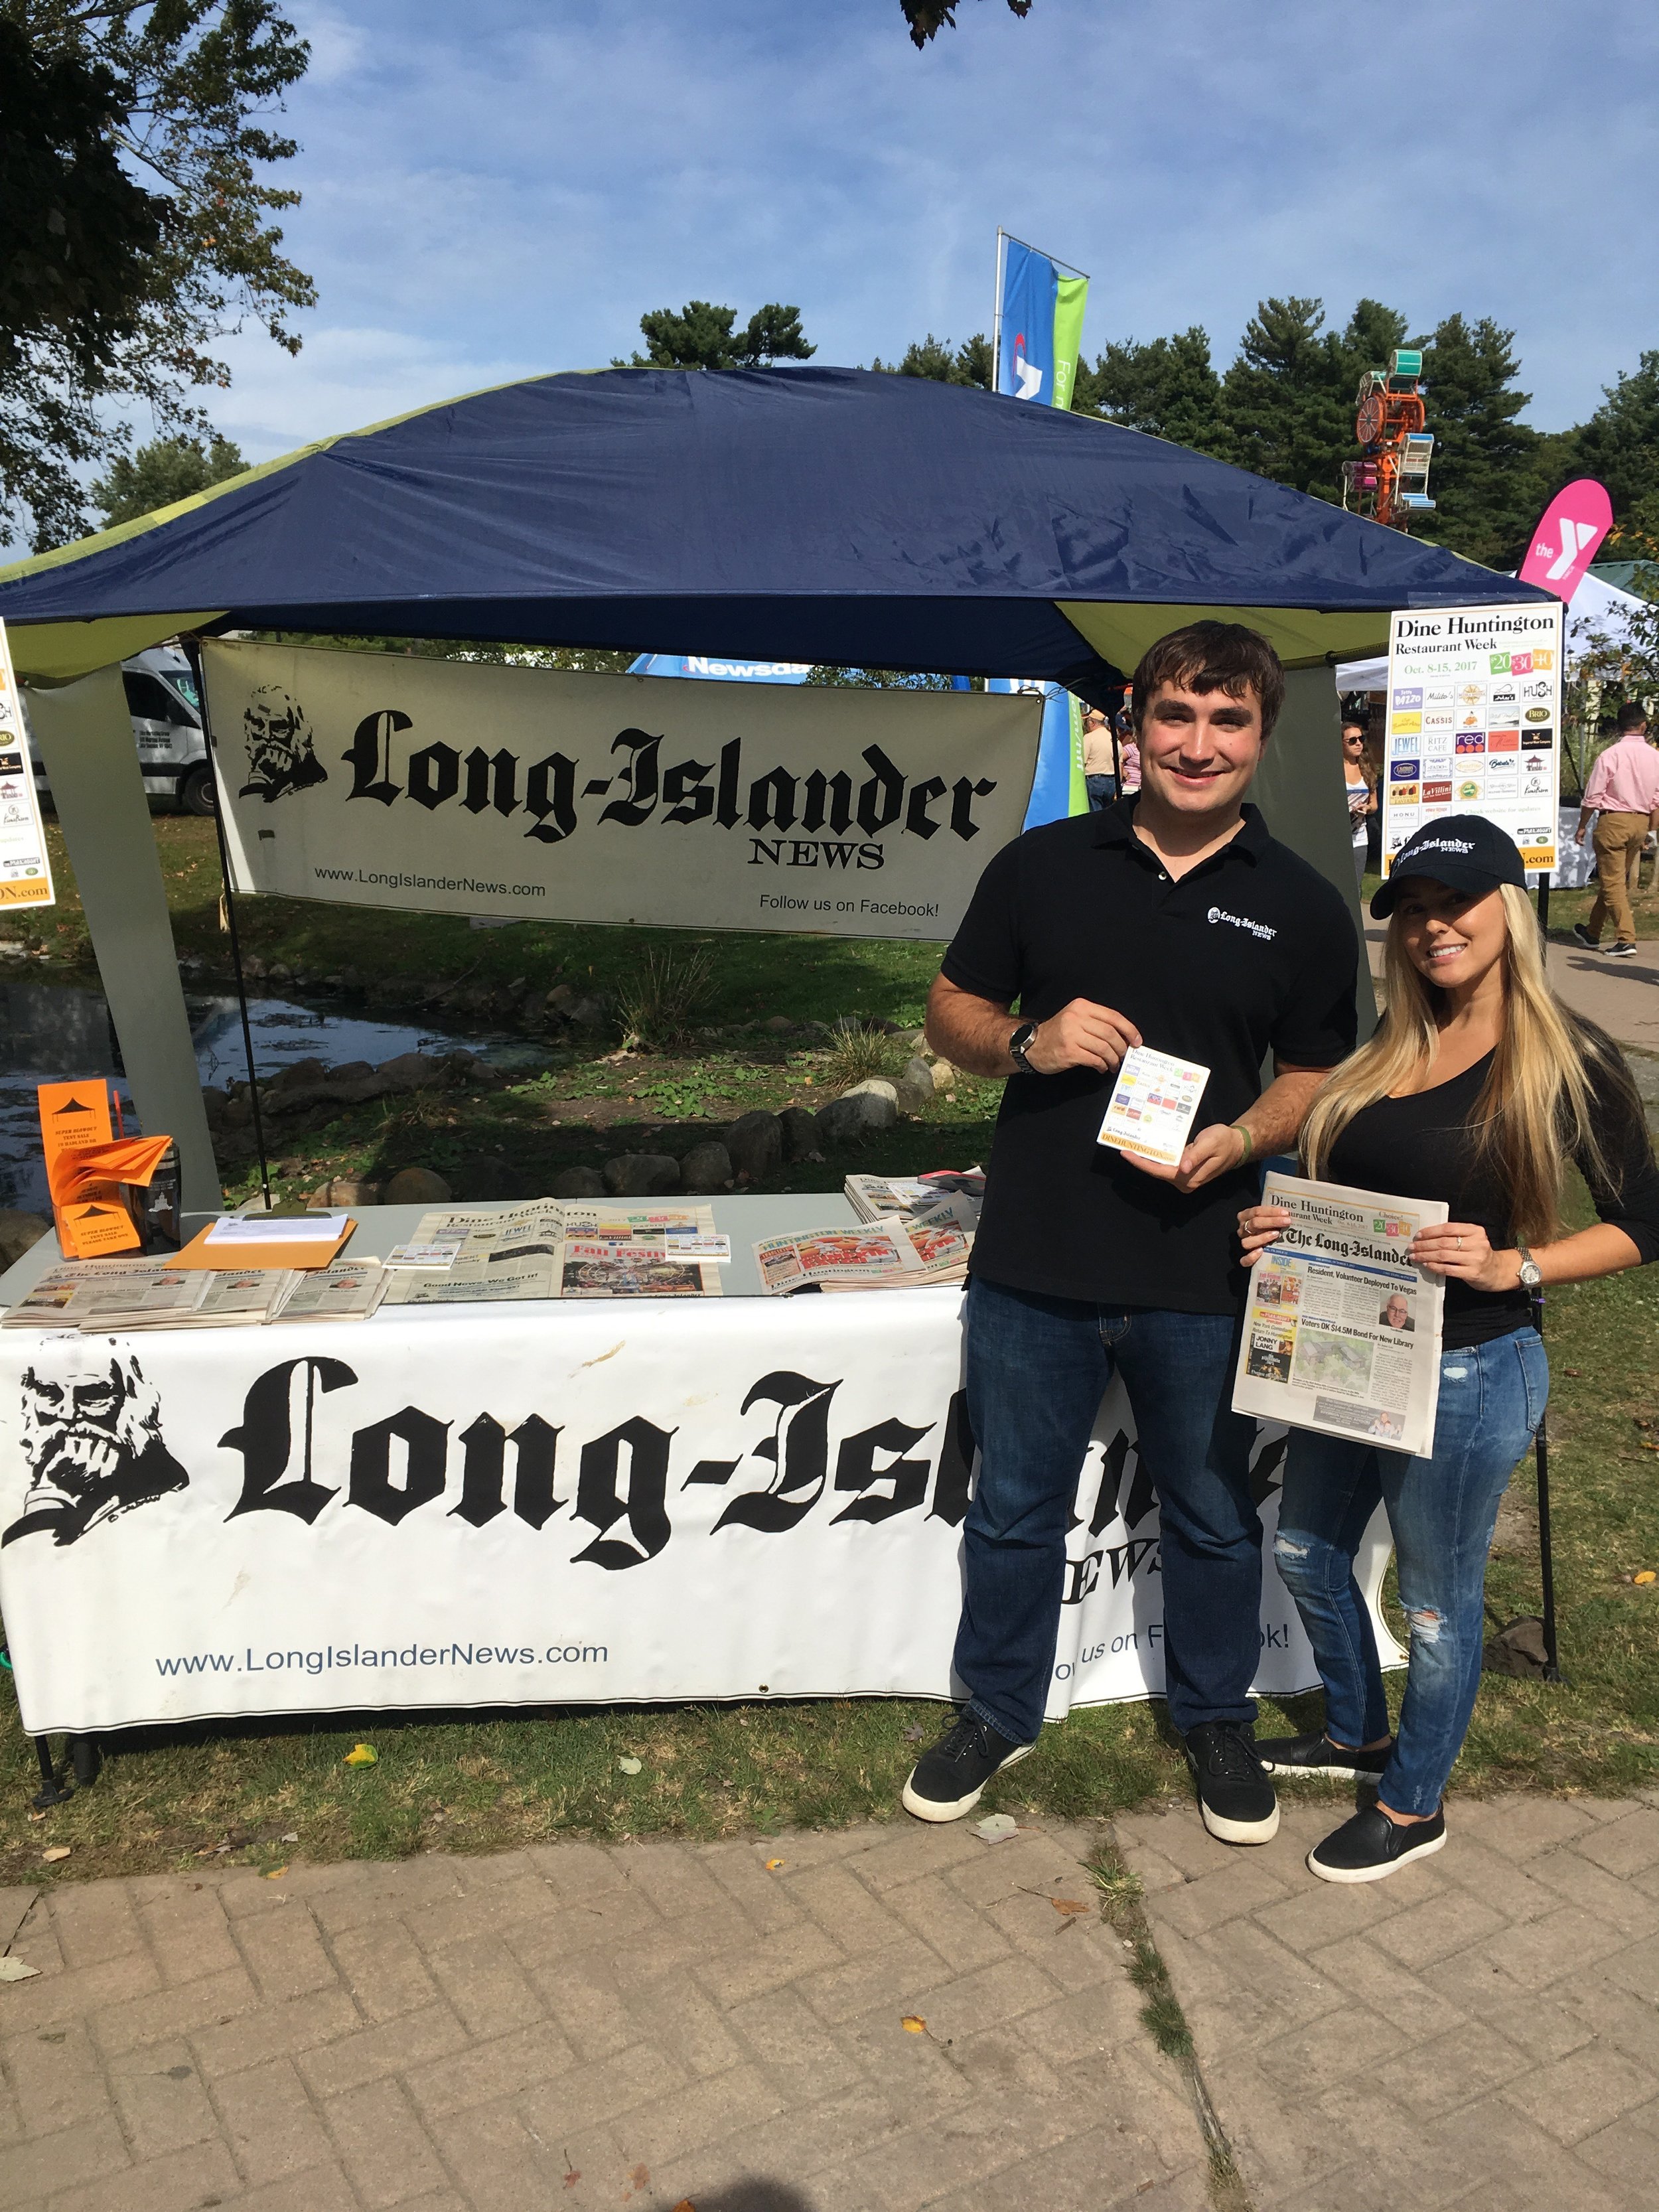   The Long-Islander team, including editor Andrew Wroblewski and volunteer Diana Murillo, handed out info on Dine Huntington Restaurant Week, running from Oct. 8-15, at the Long Island Fall Festival.&nbsp;  Long Islander News Photos/Paul Shapiro  